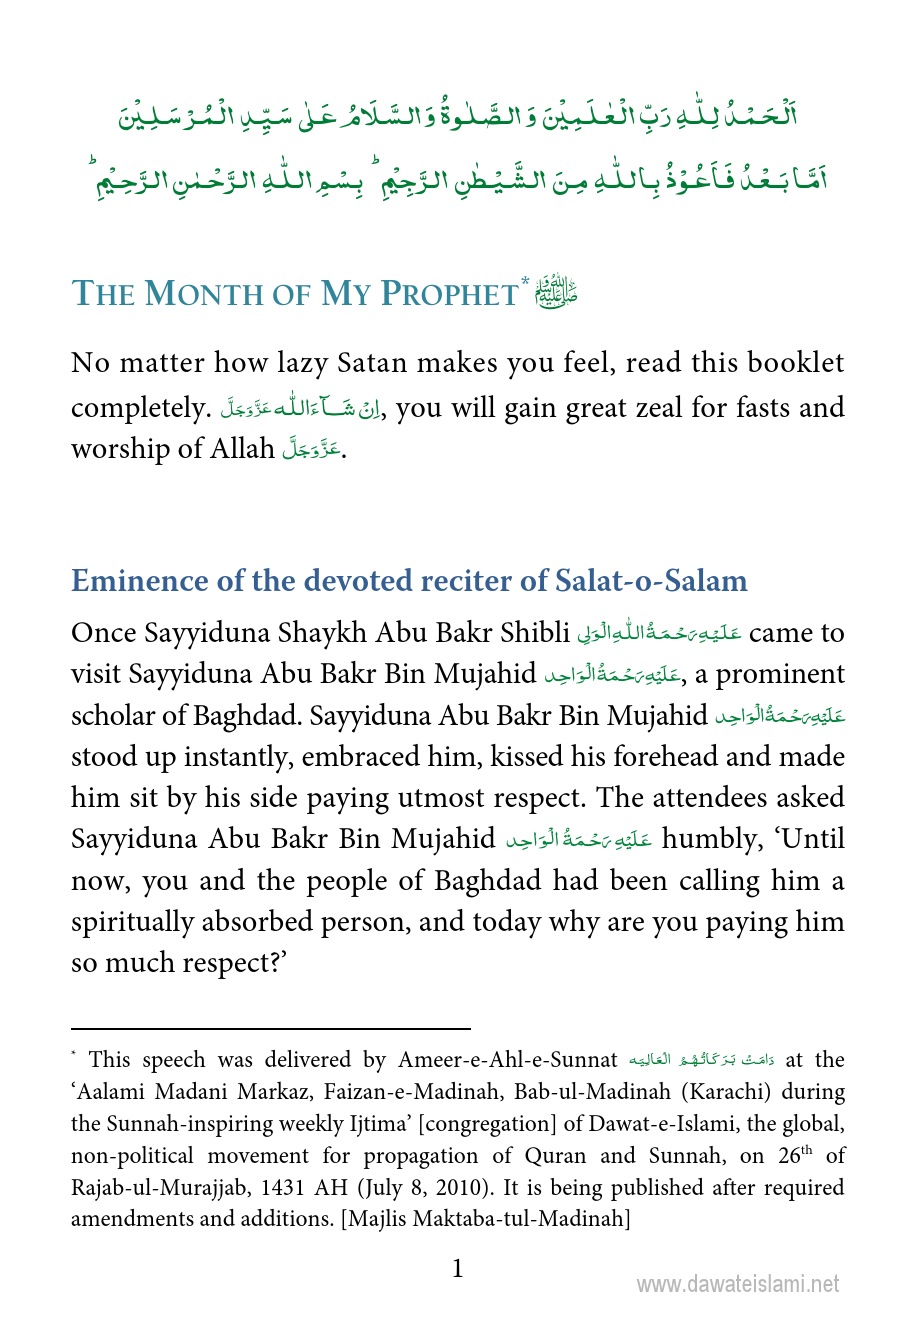 TheMonthOfMyProphet.pdf, 43- pages 